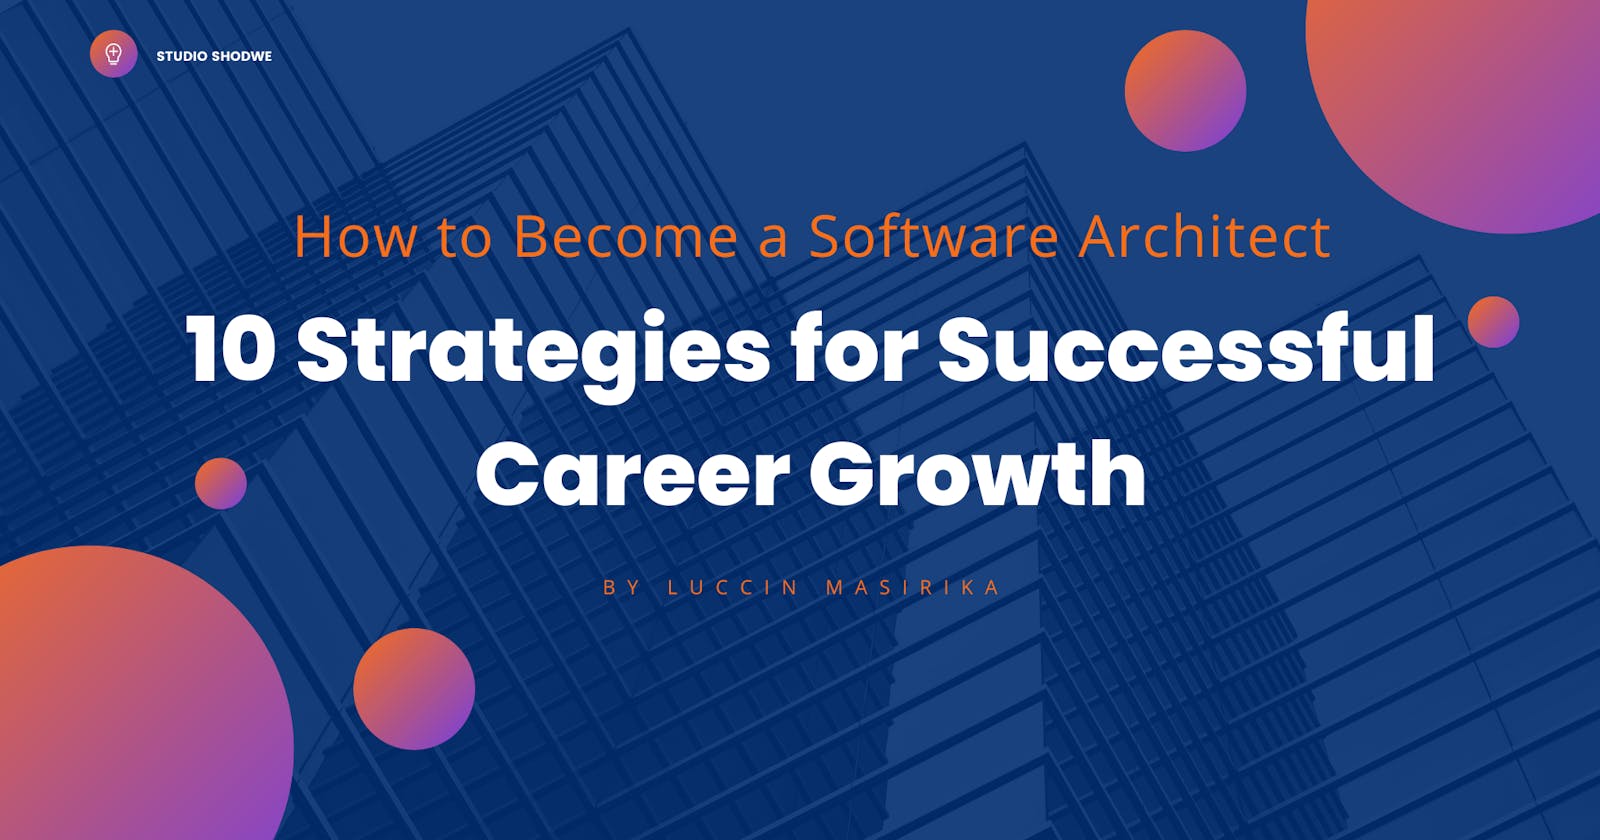 How to Become a Software Architect: 10 Strategies for Successful Career Growth